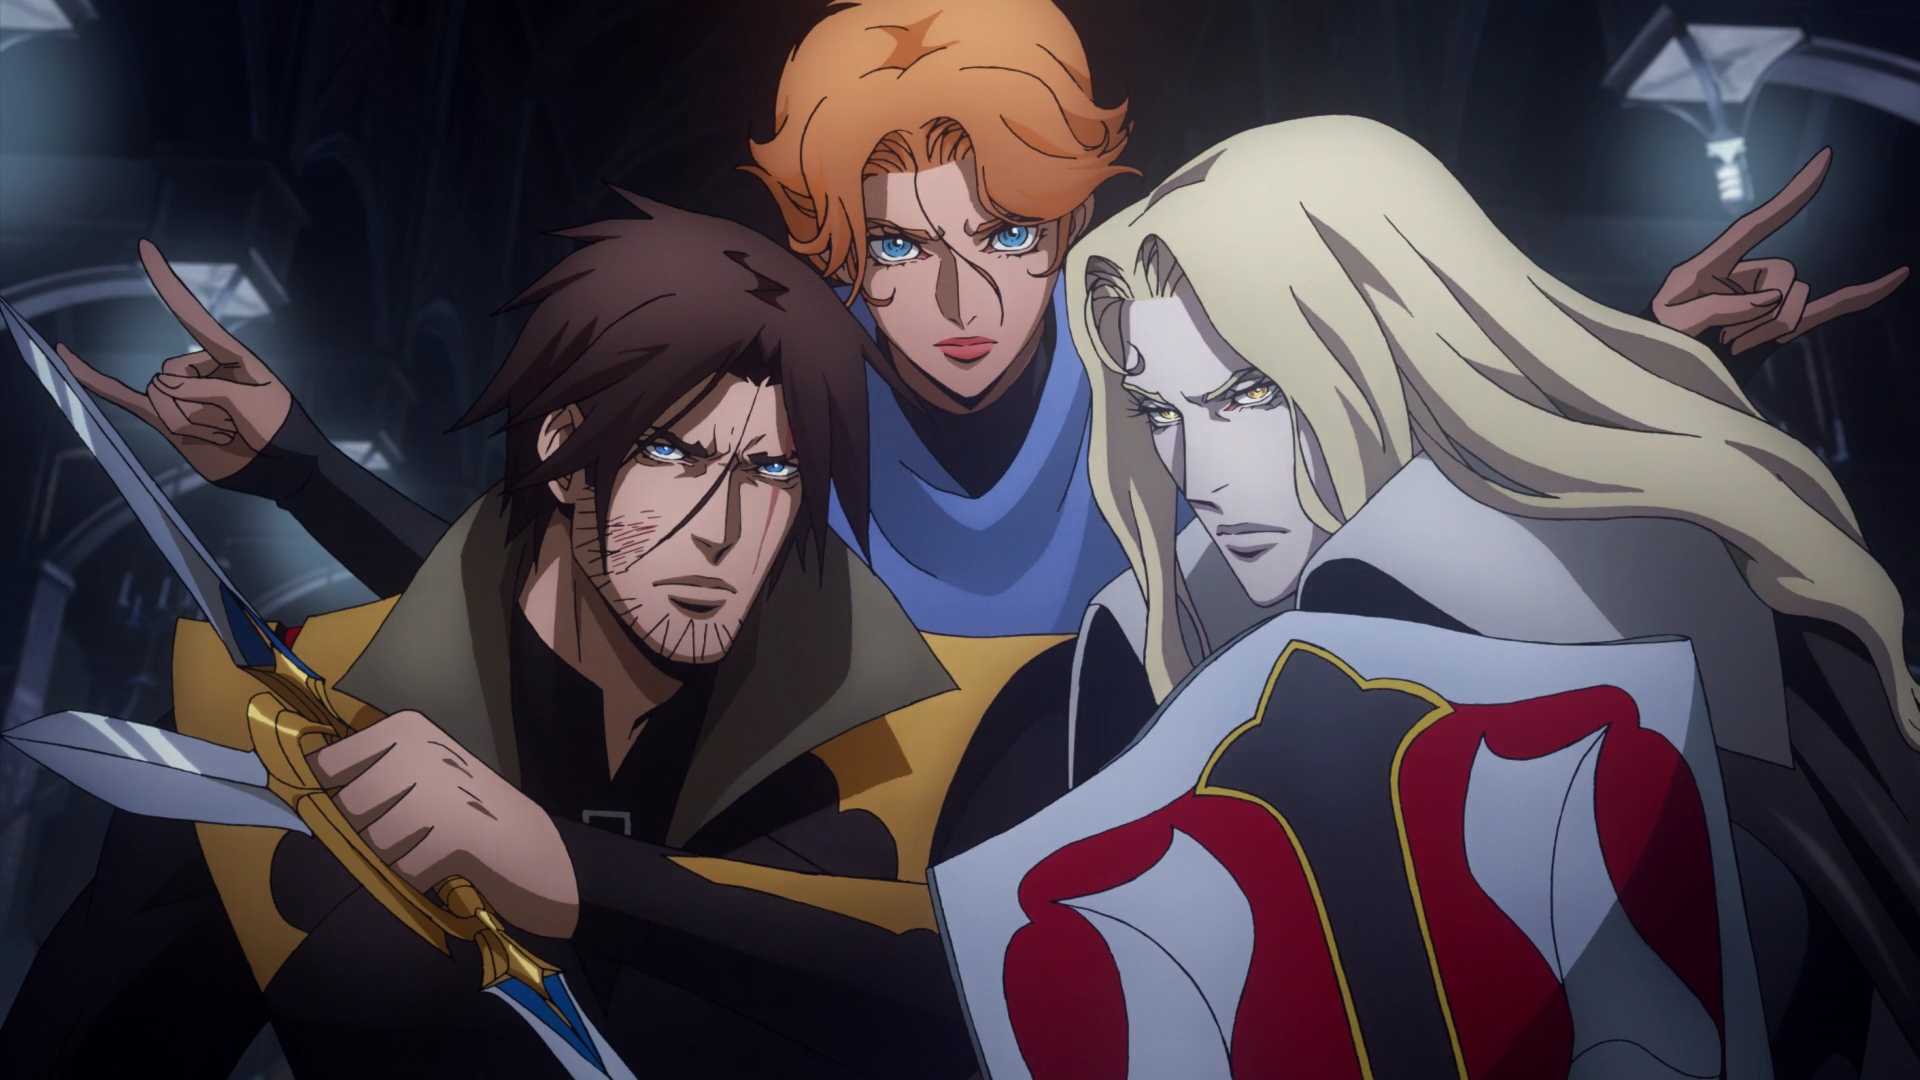 Is castlevania season 5 cancelled? + spin-off confirm in winter 2023